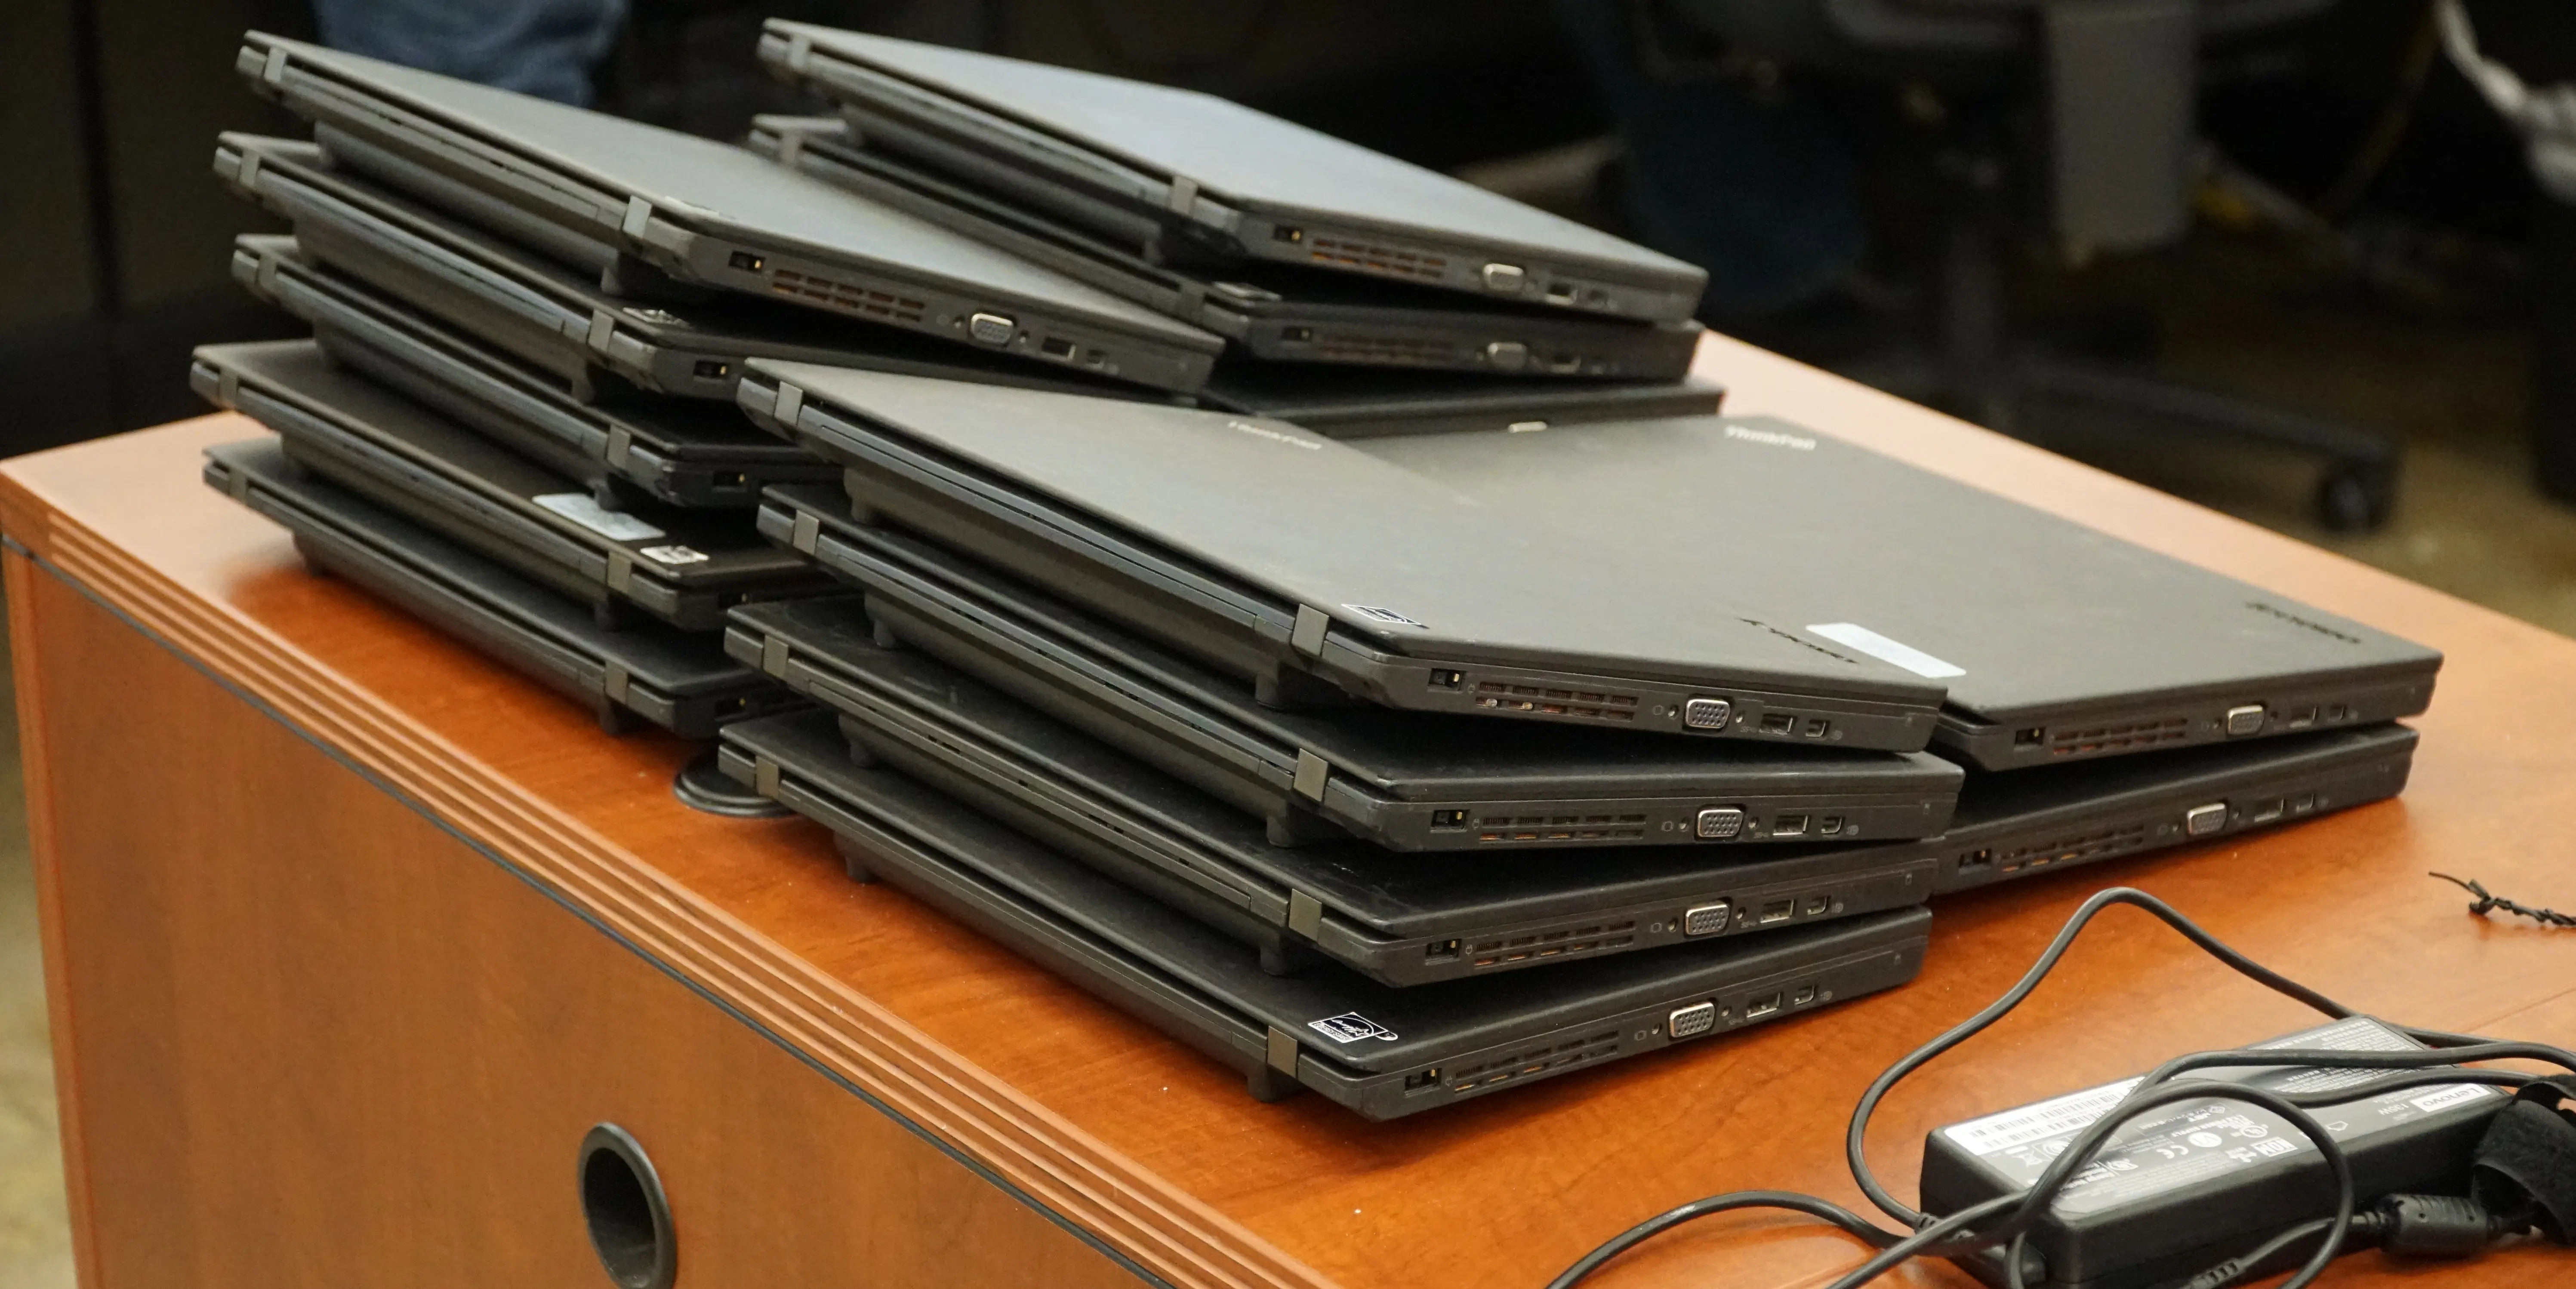 A pile of laptops